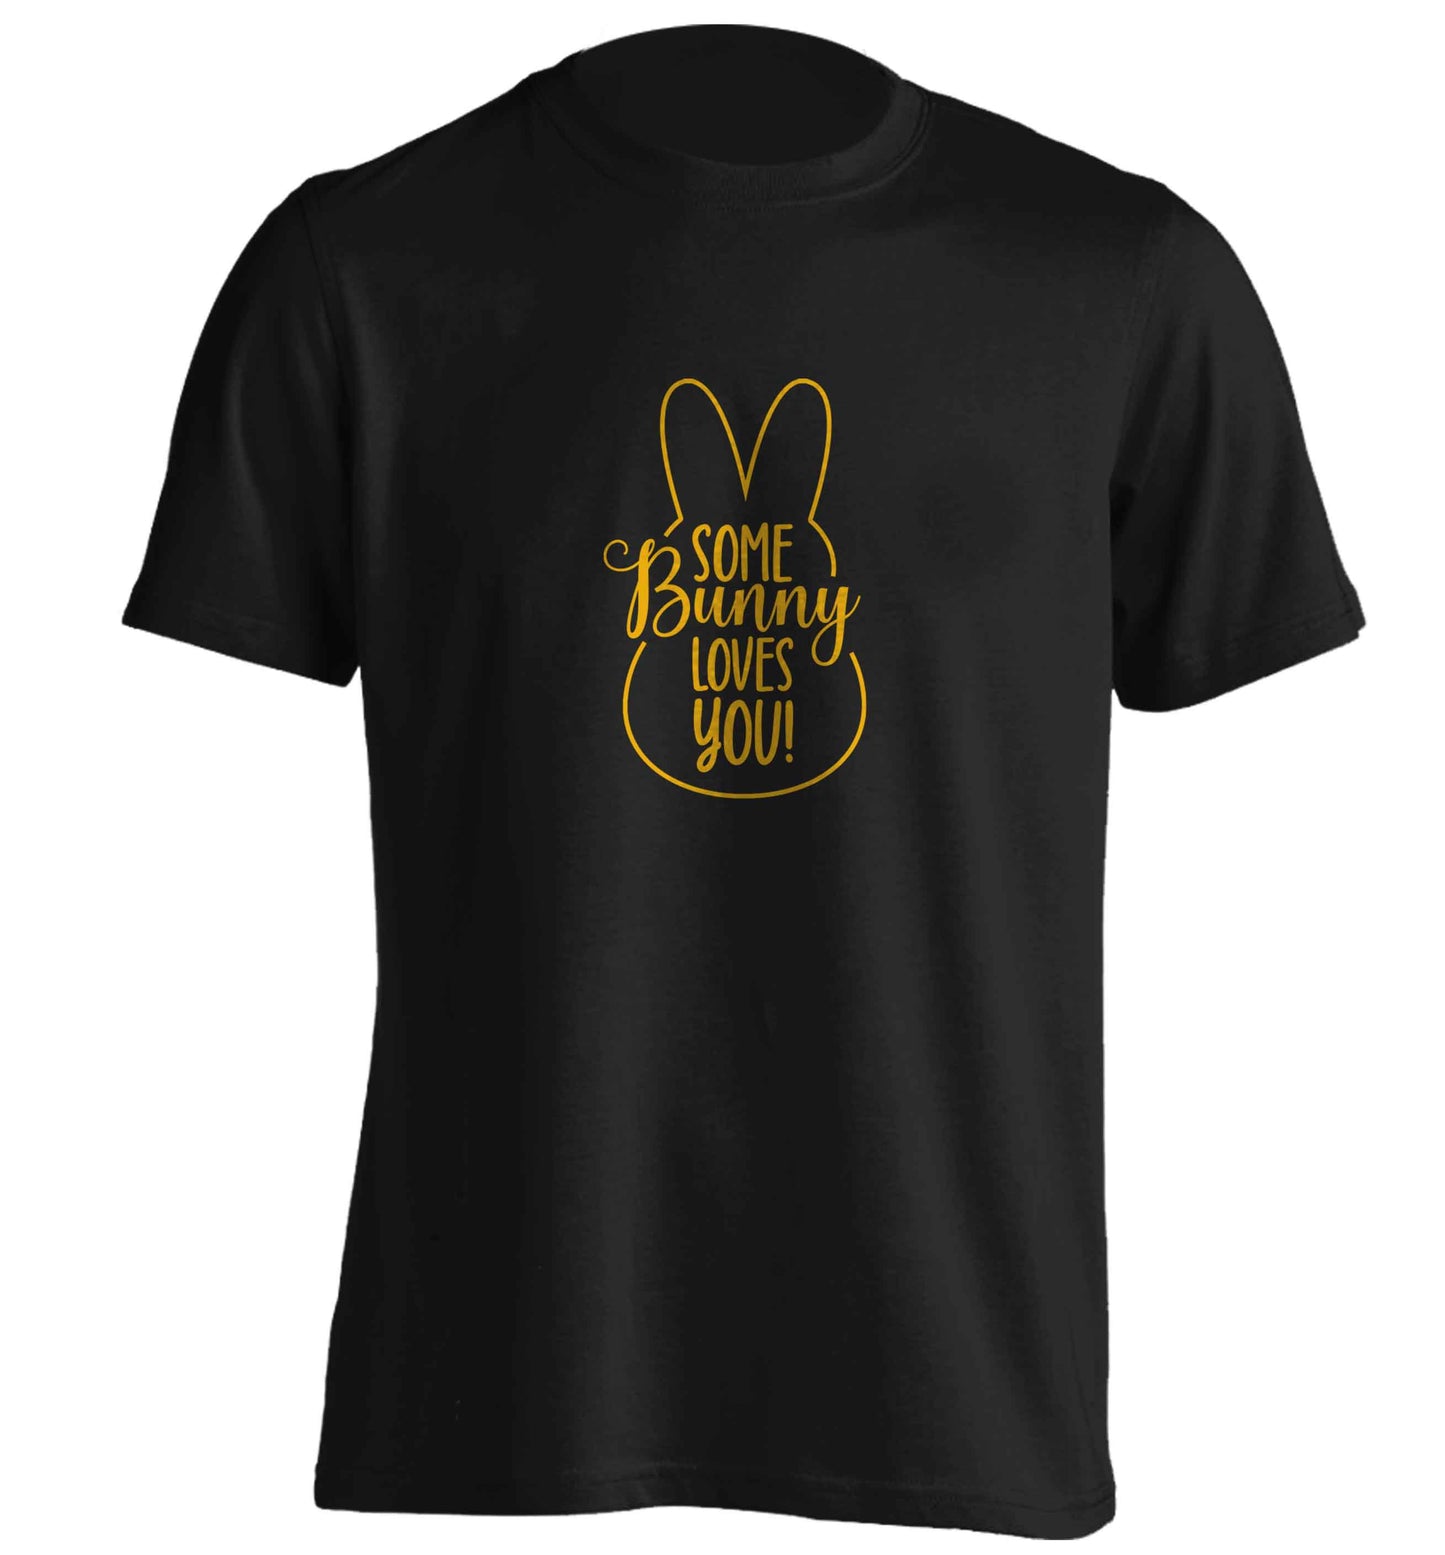 Some bunny loves you adults unisex black Tshirt 2XL